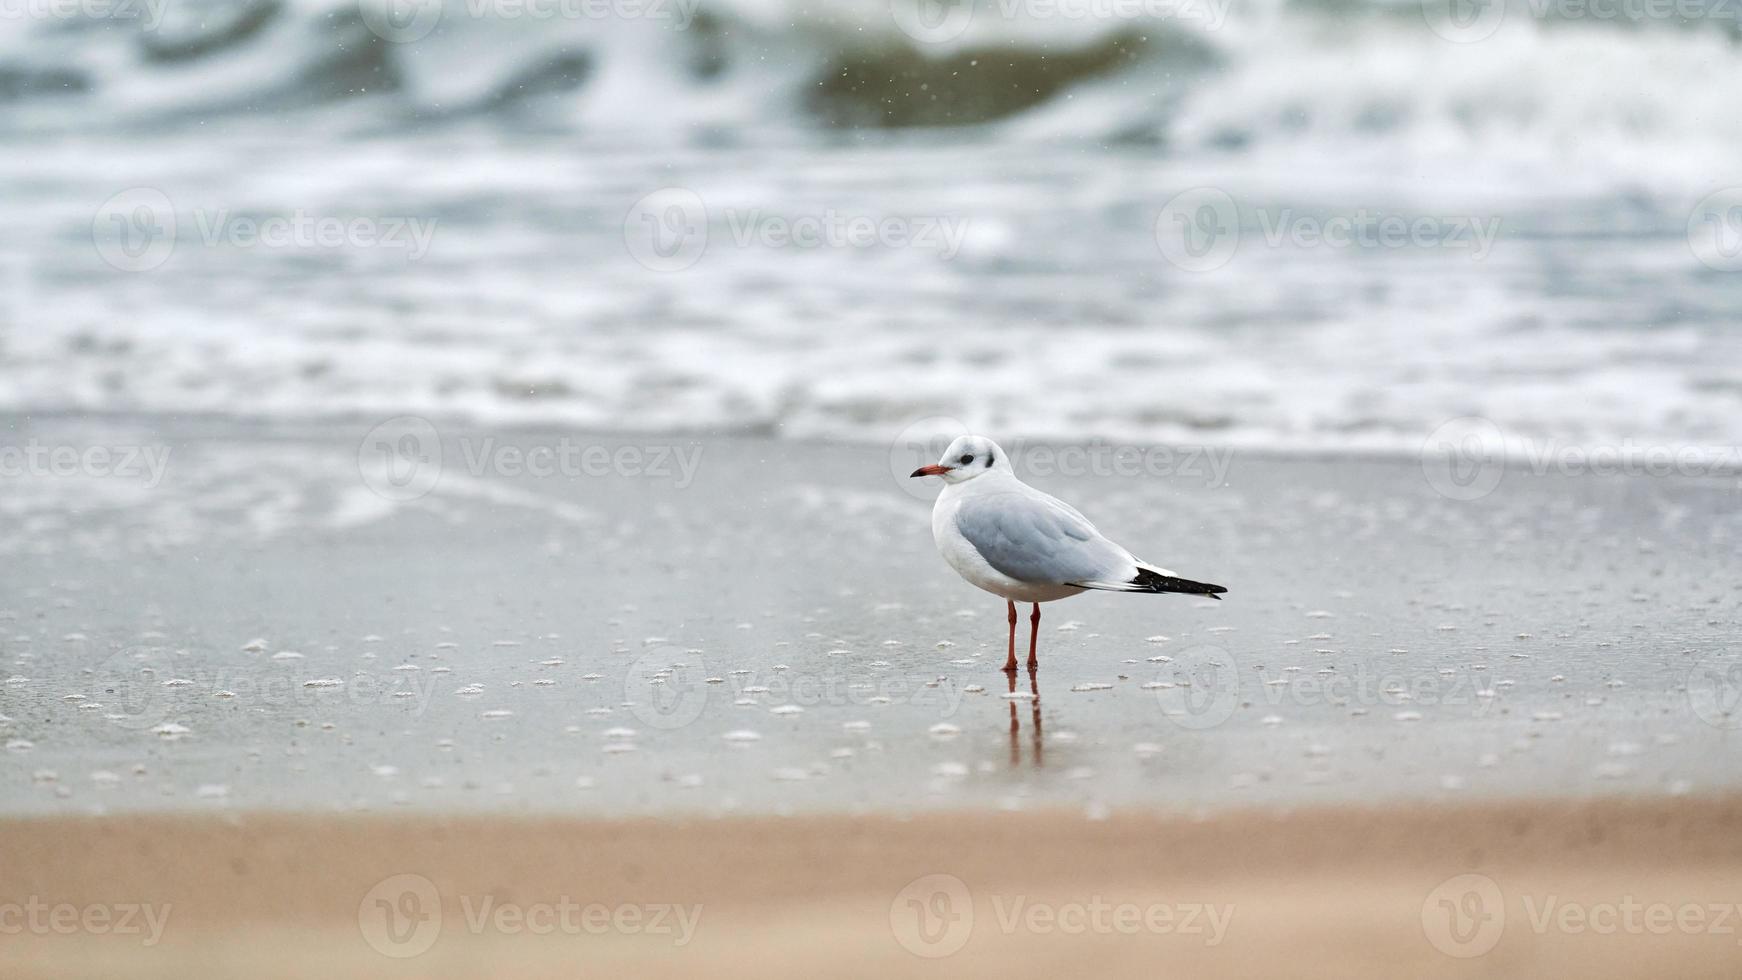 Black-headed seagull at beach, loneliness concept photo